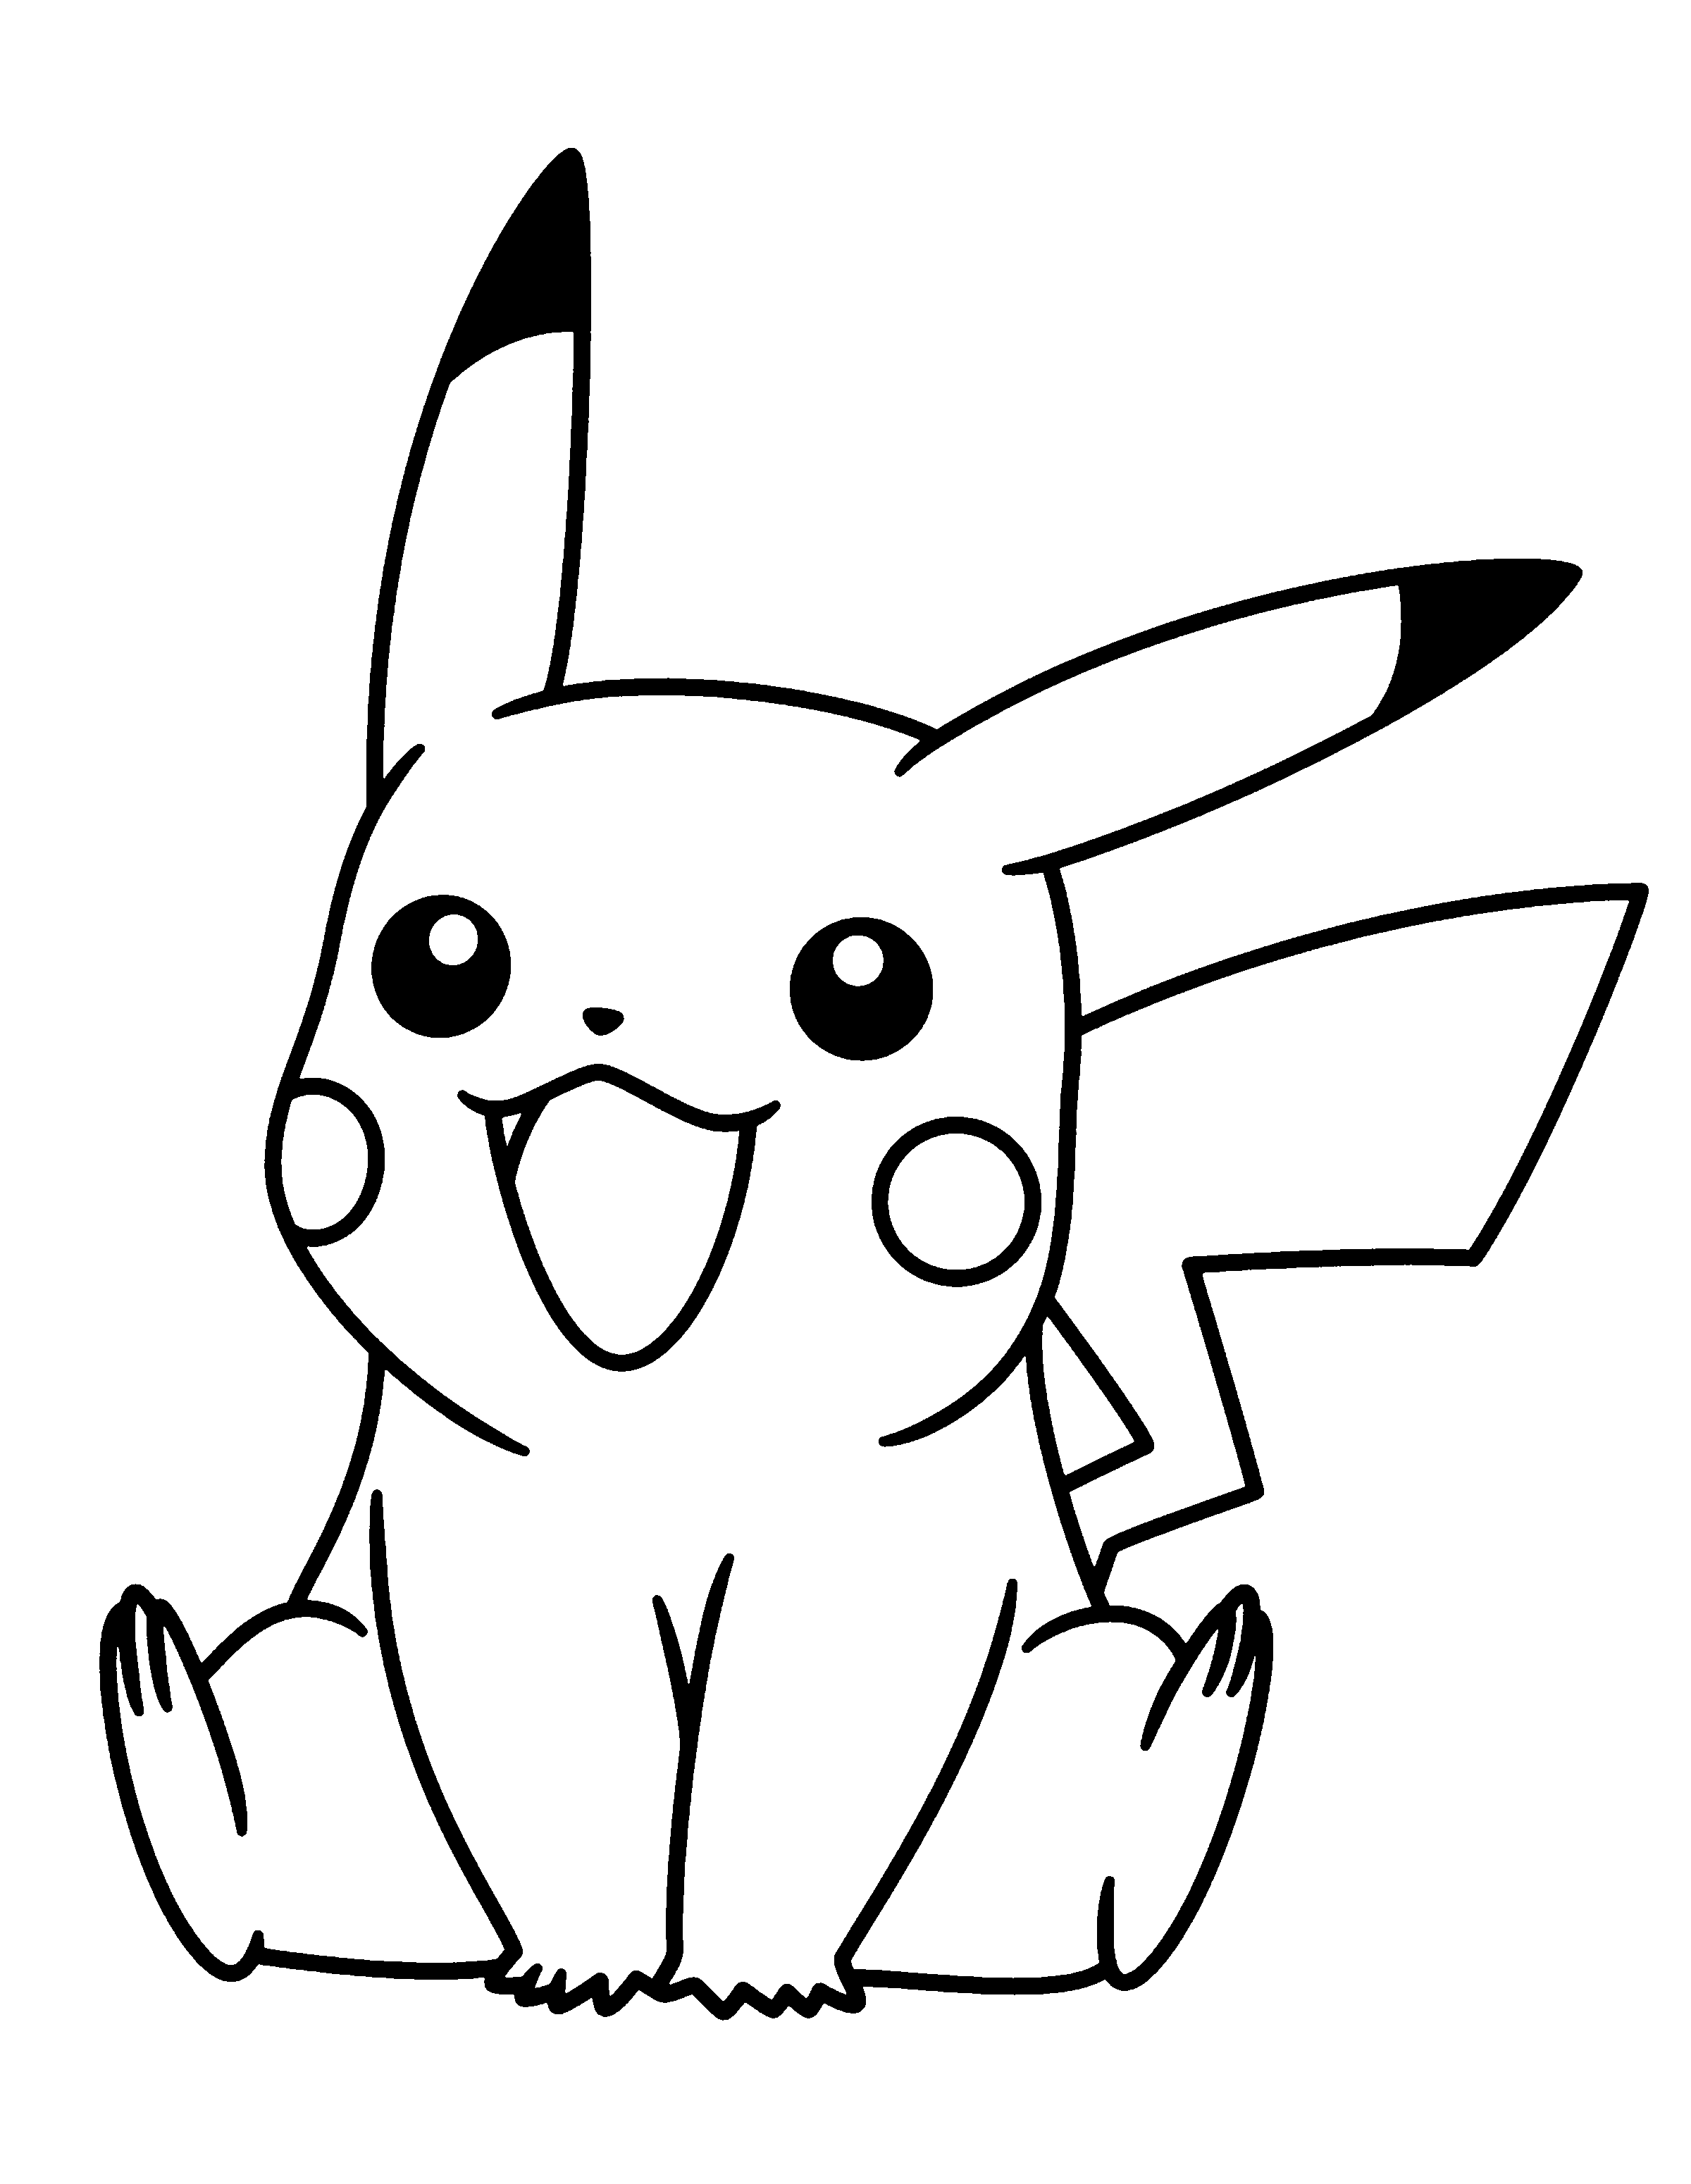 Drawing Pokemon #24653 (Cartoons) – Printable coloring pages